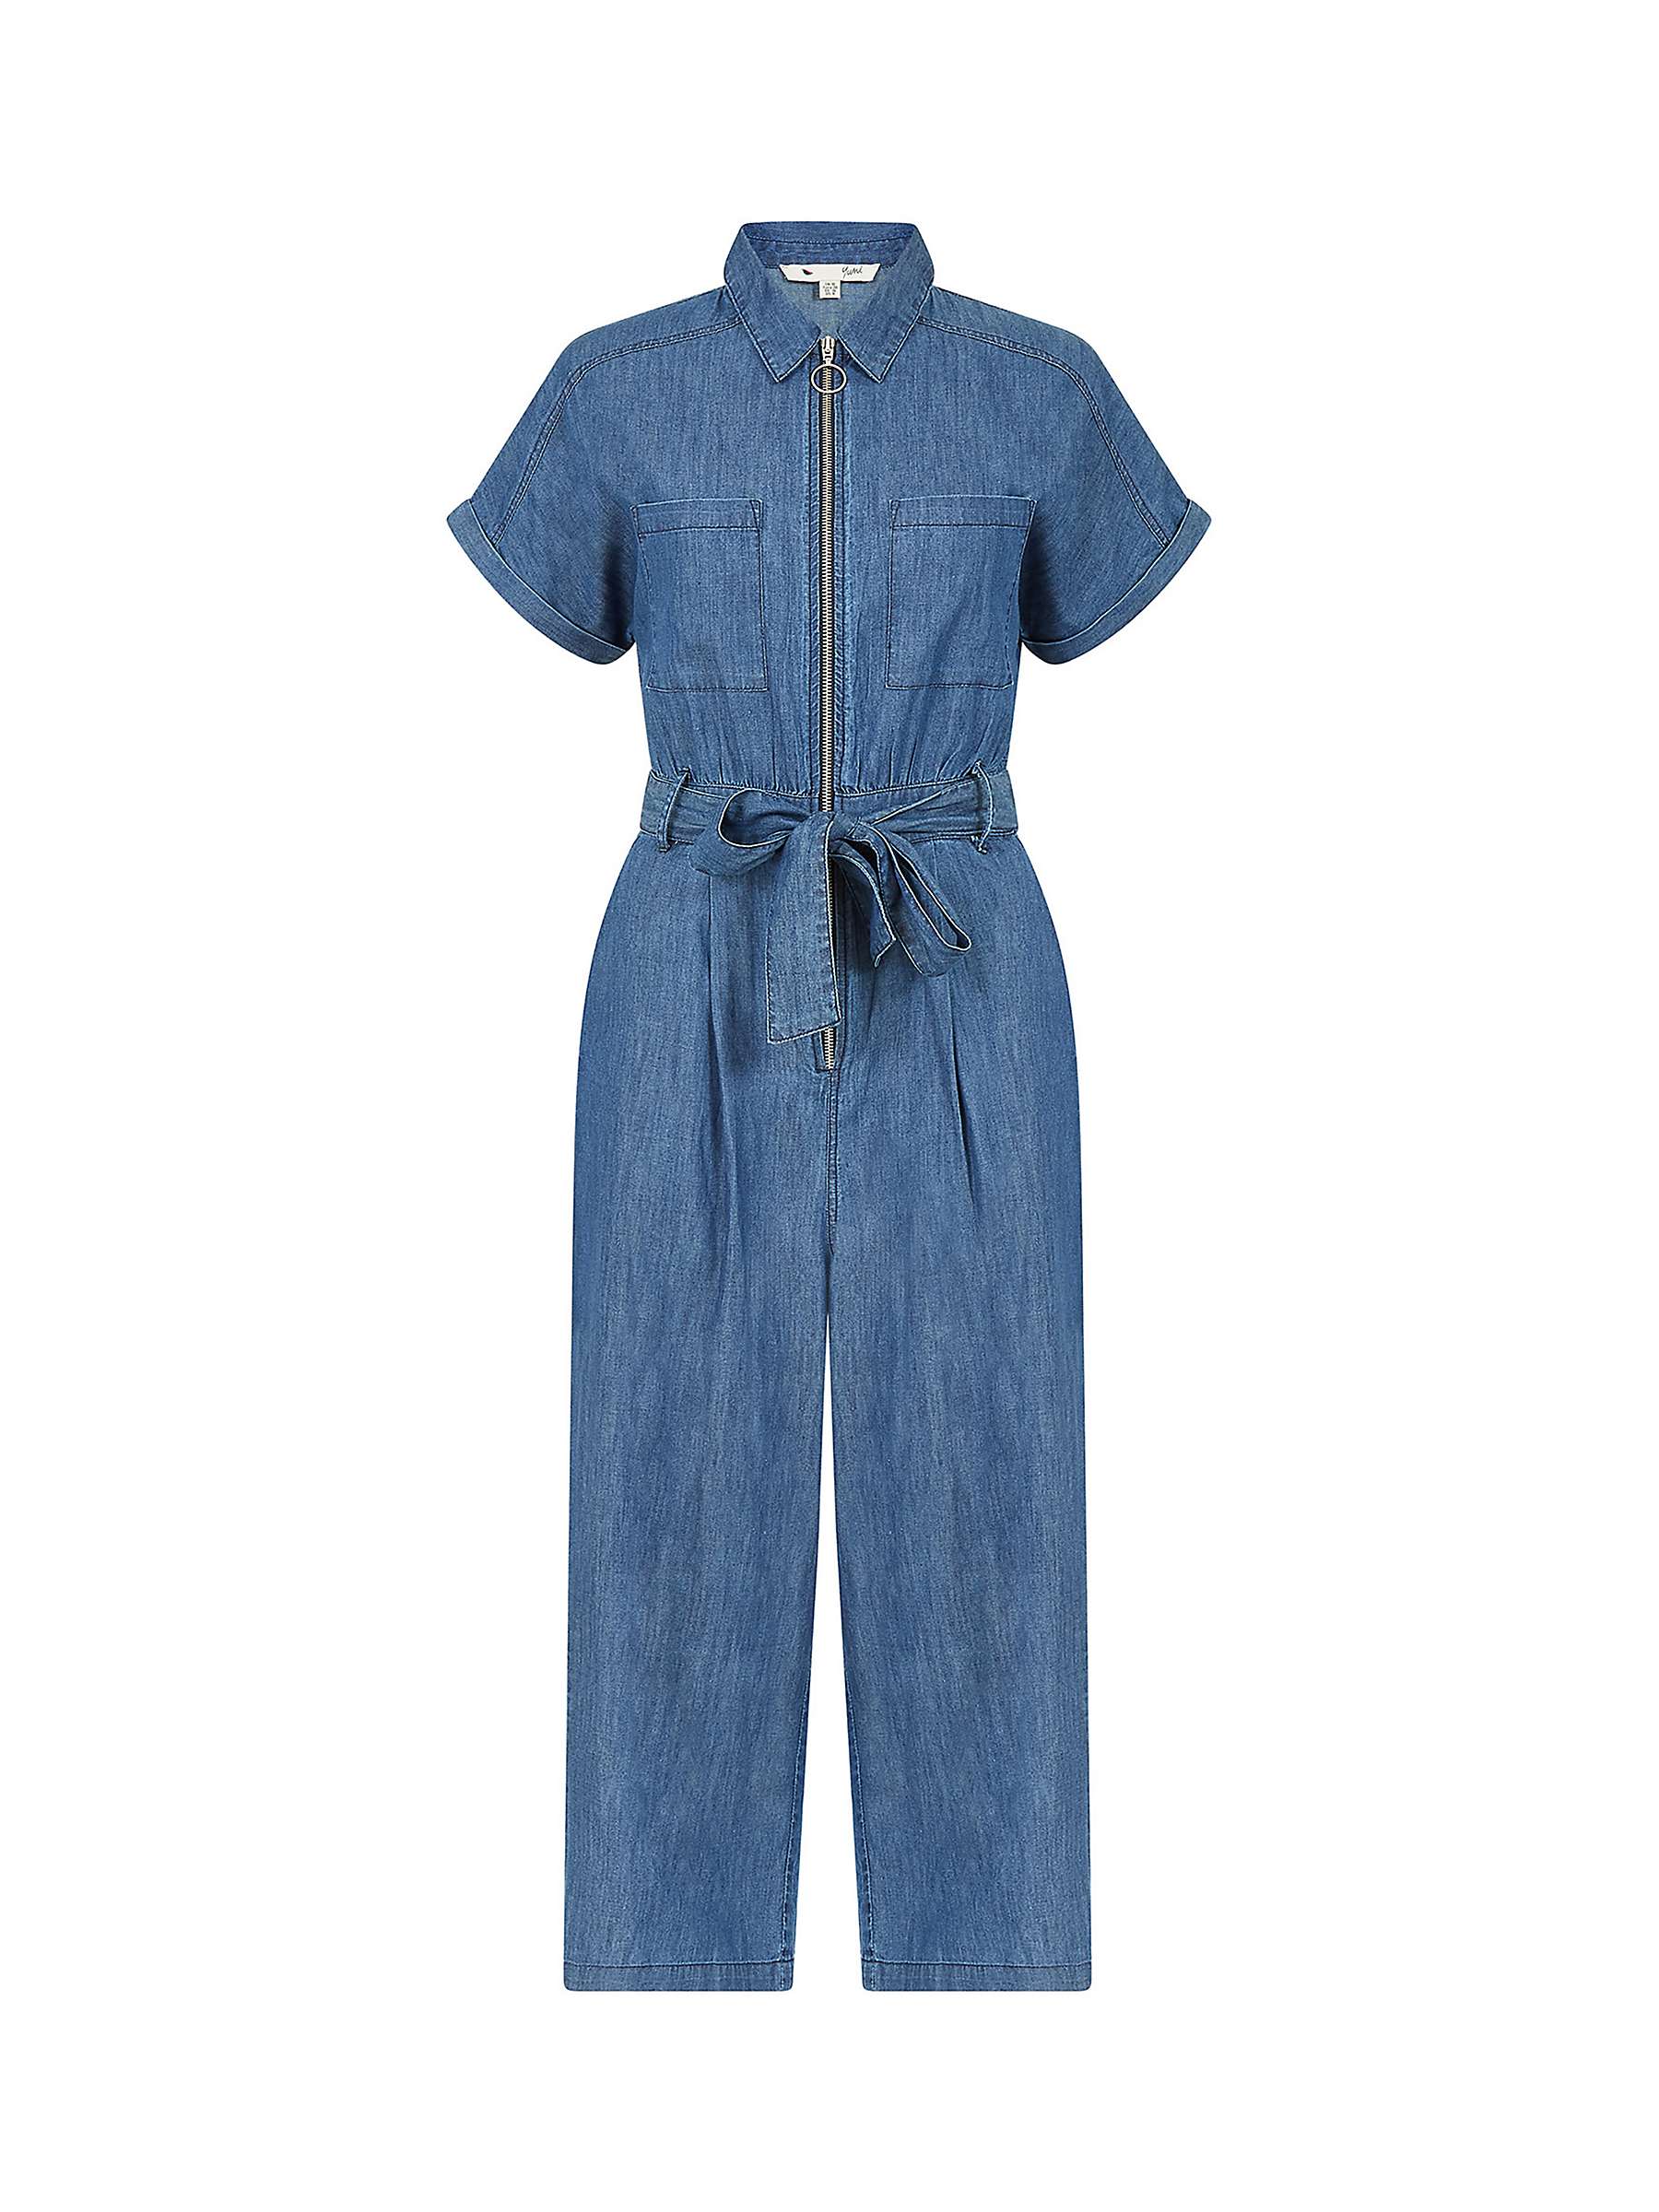 Buy Yumi Chambray Utility Boiler Suit, Blue Online at johnlewis.com